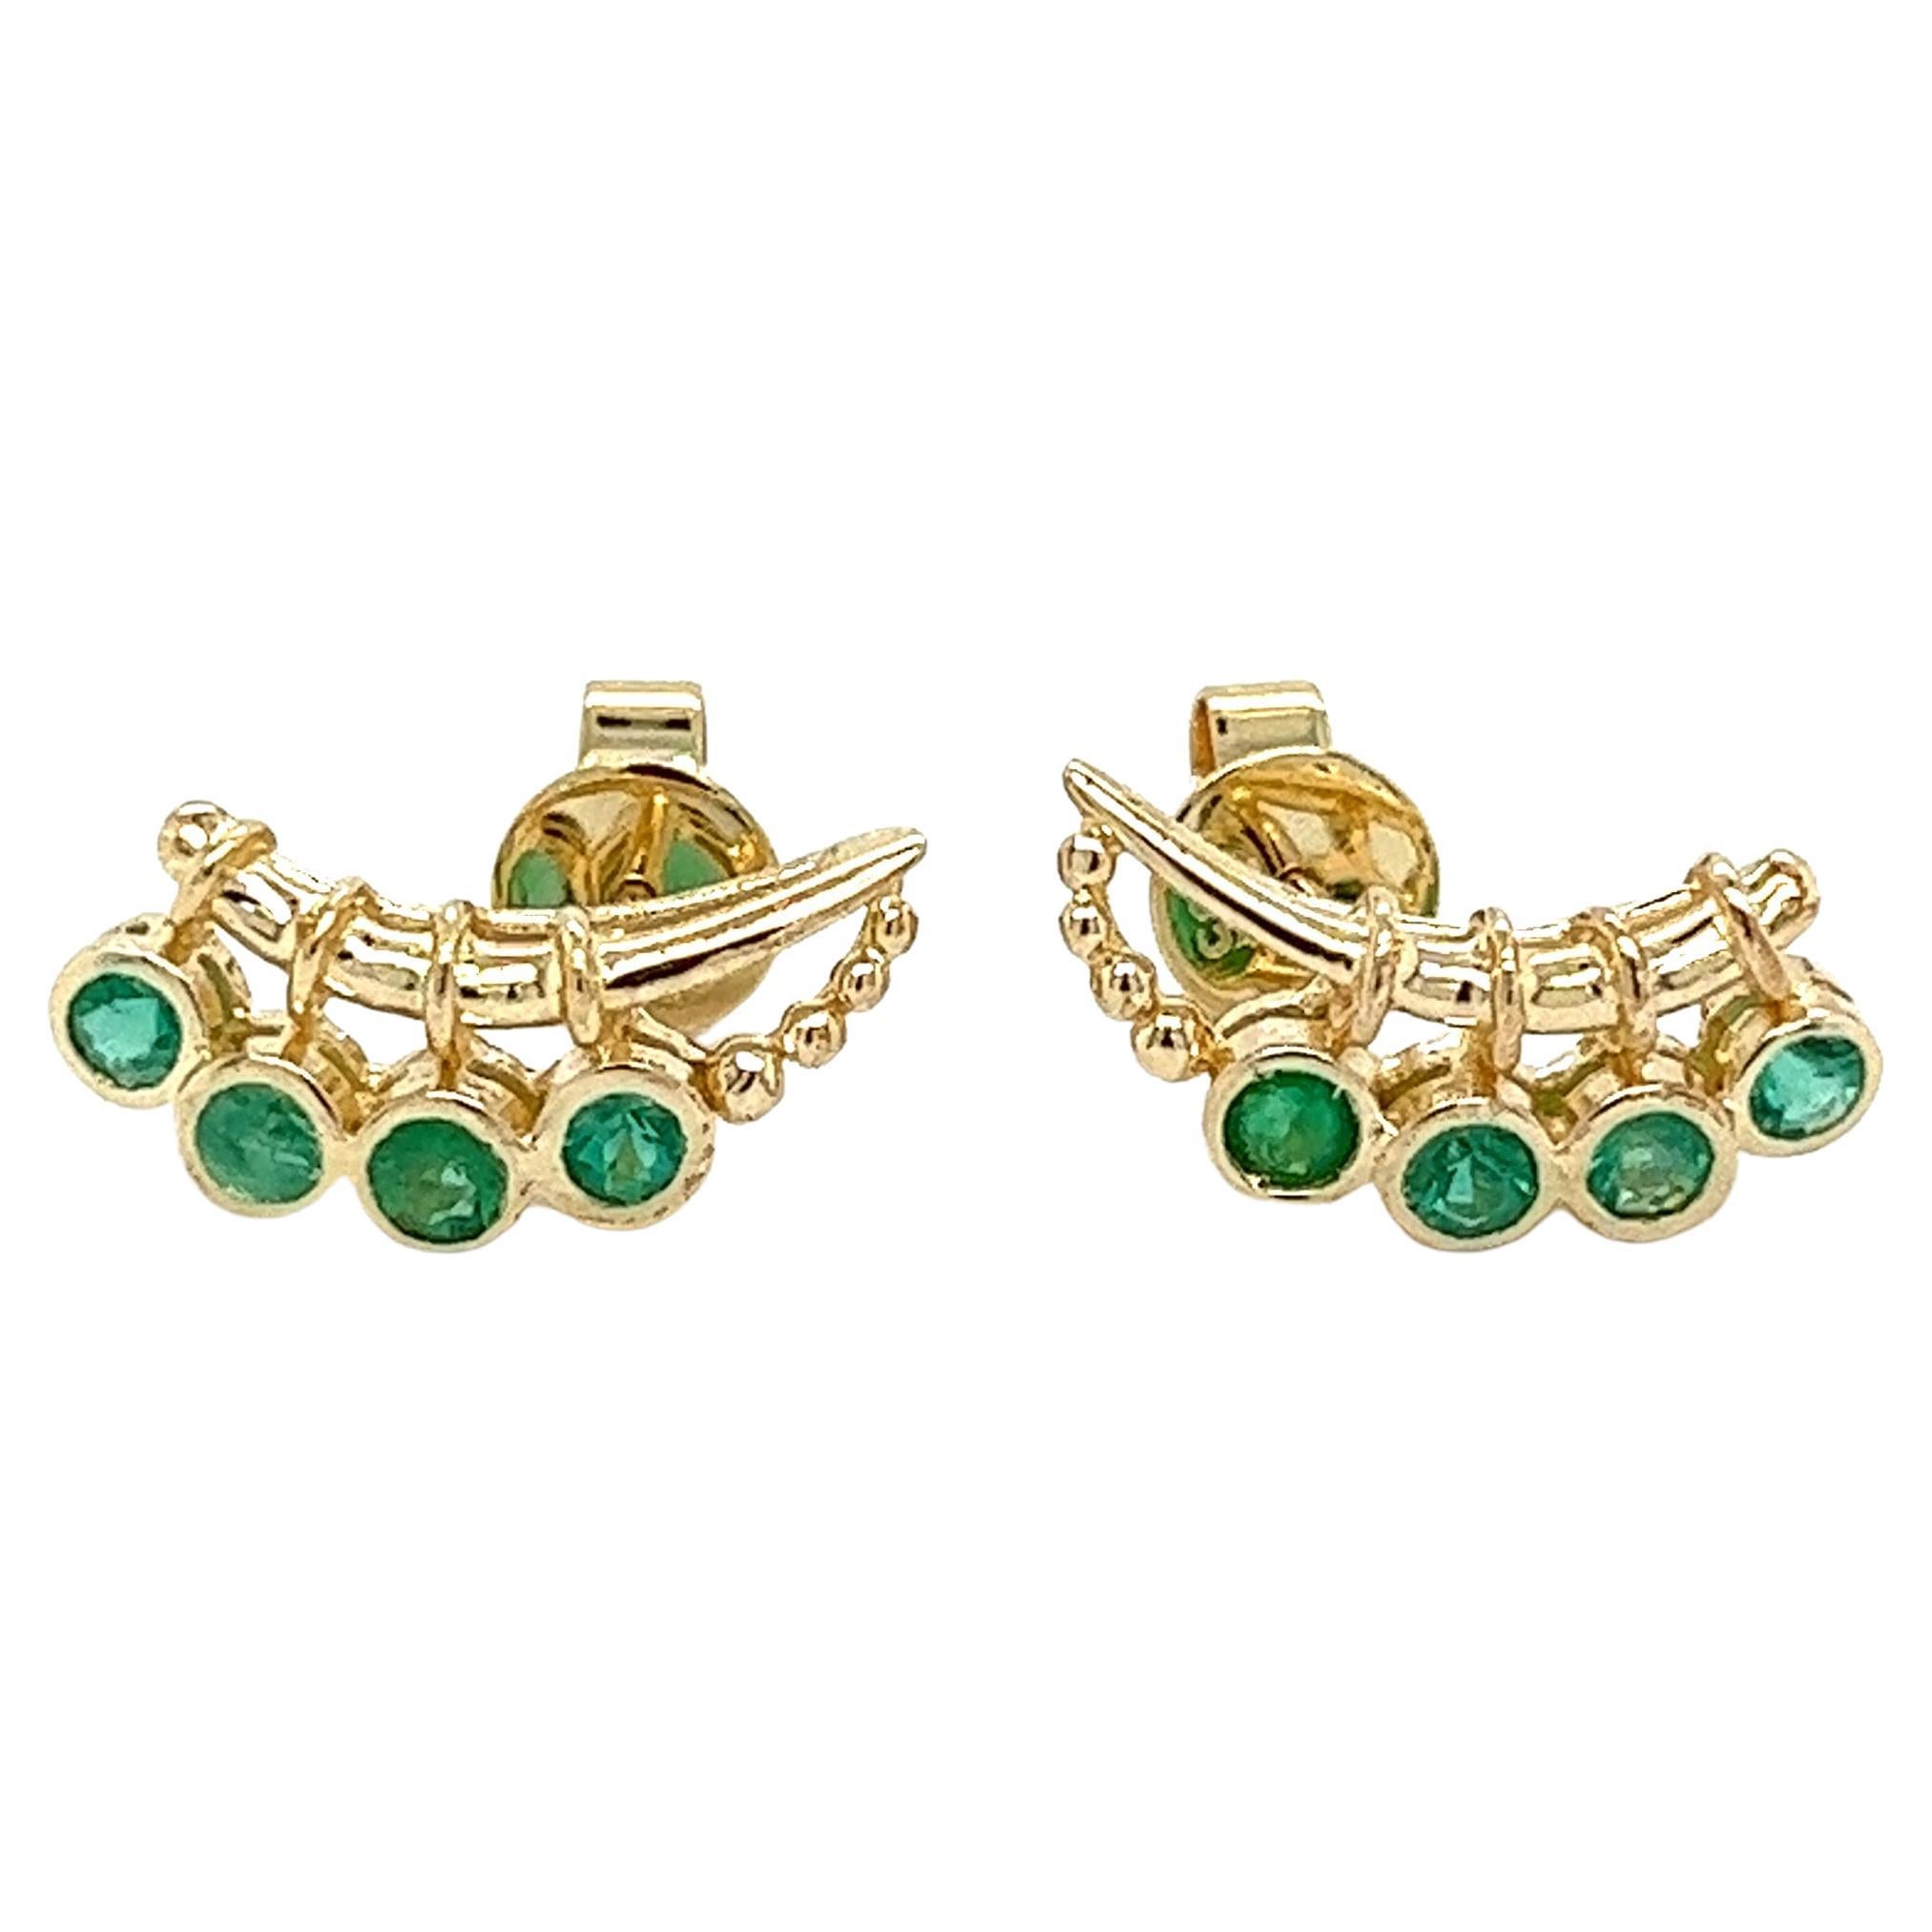 Round Emerald Ear Climber Earrings in 14K Gold For Sale